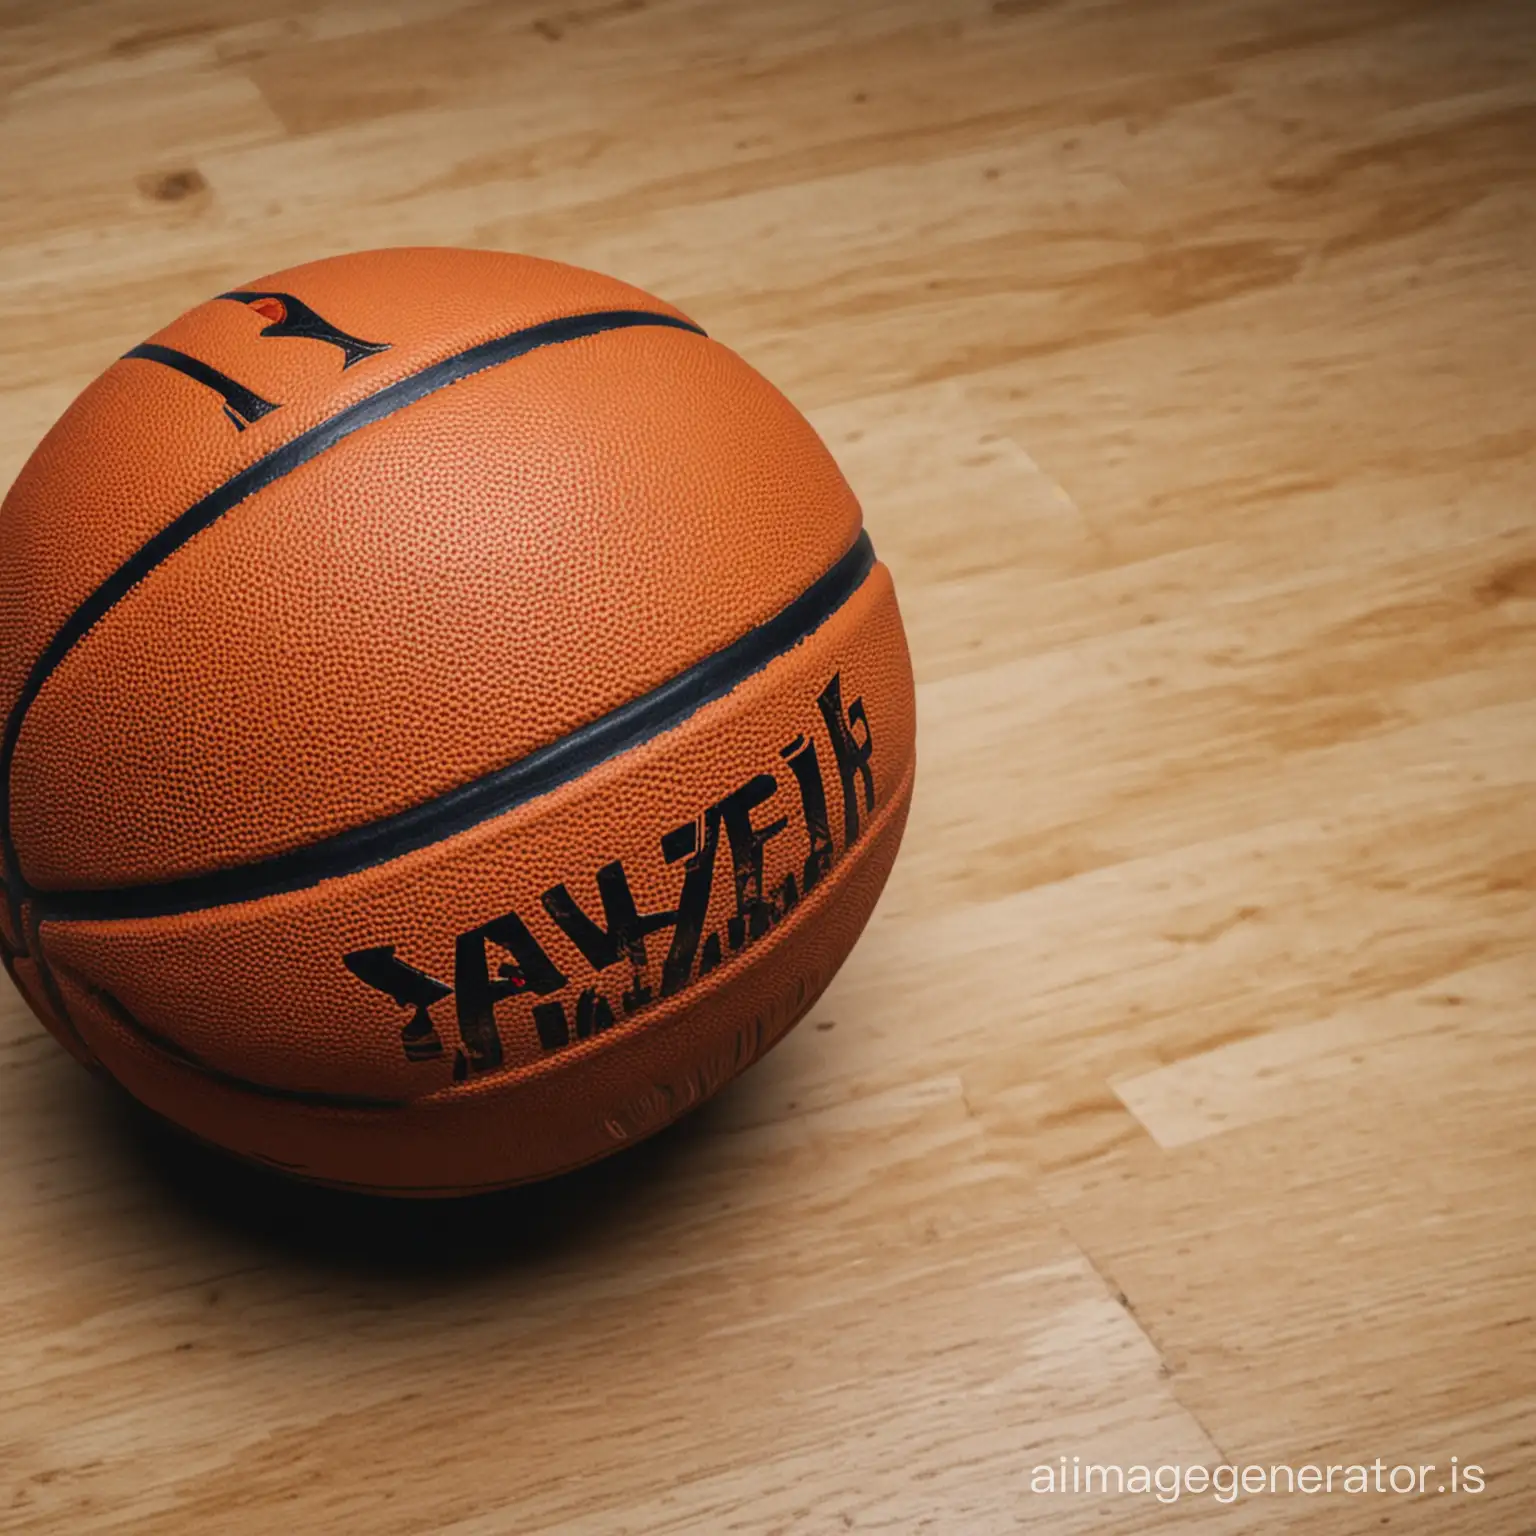 4k picture of a basketball